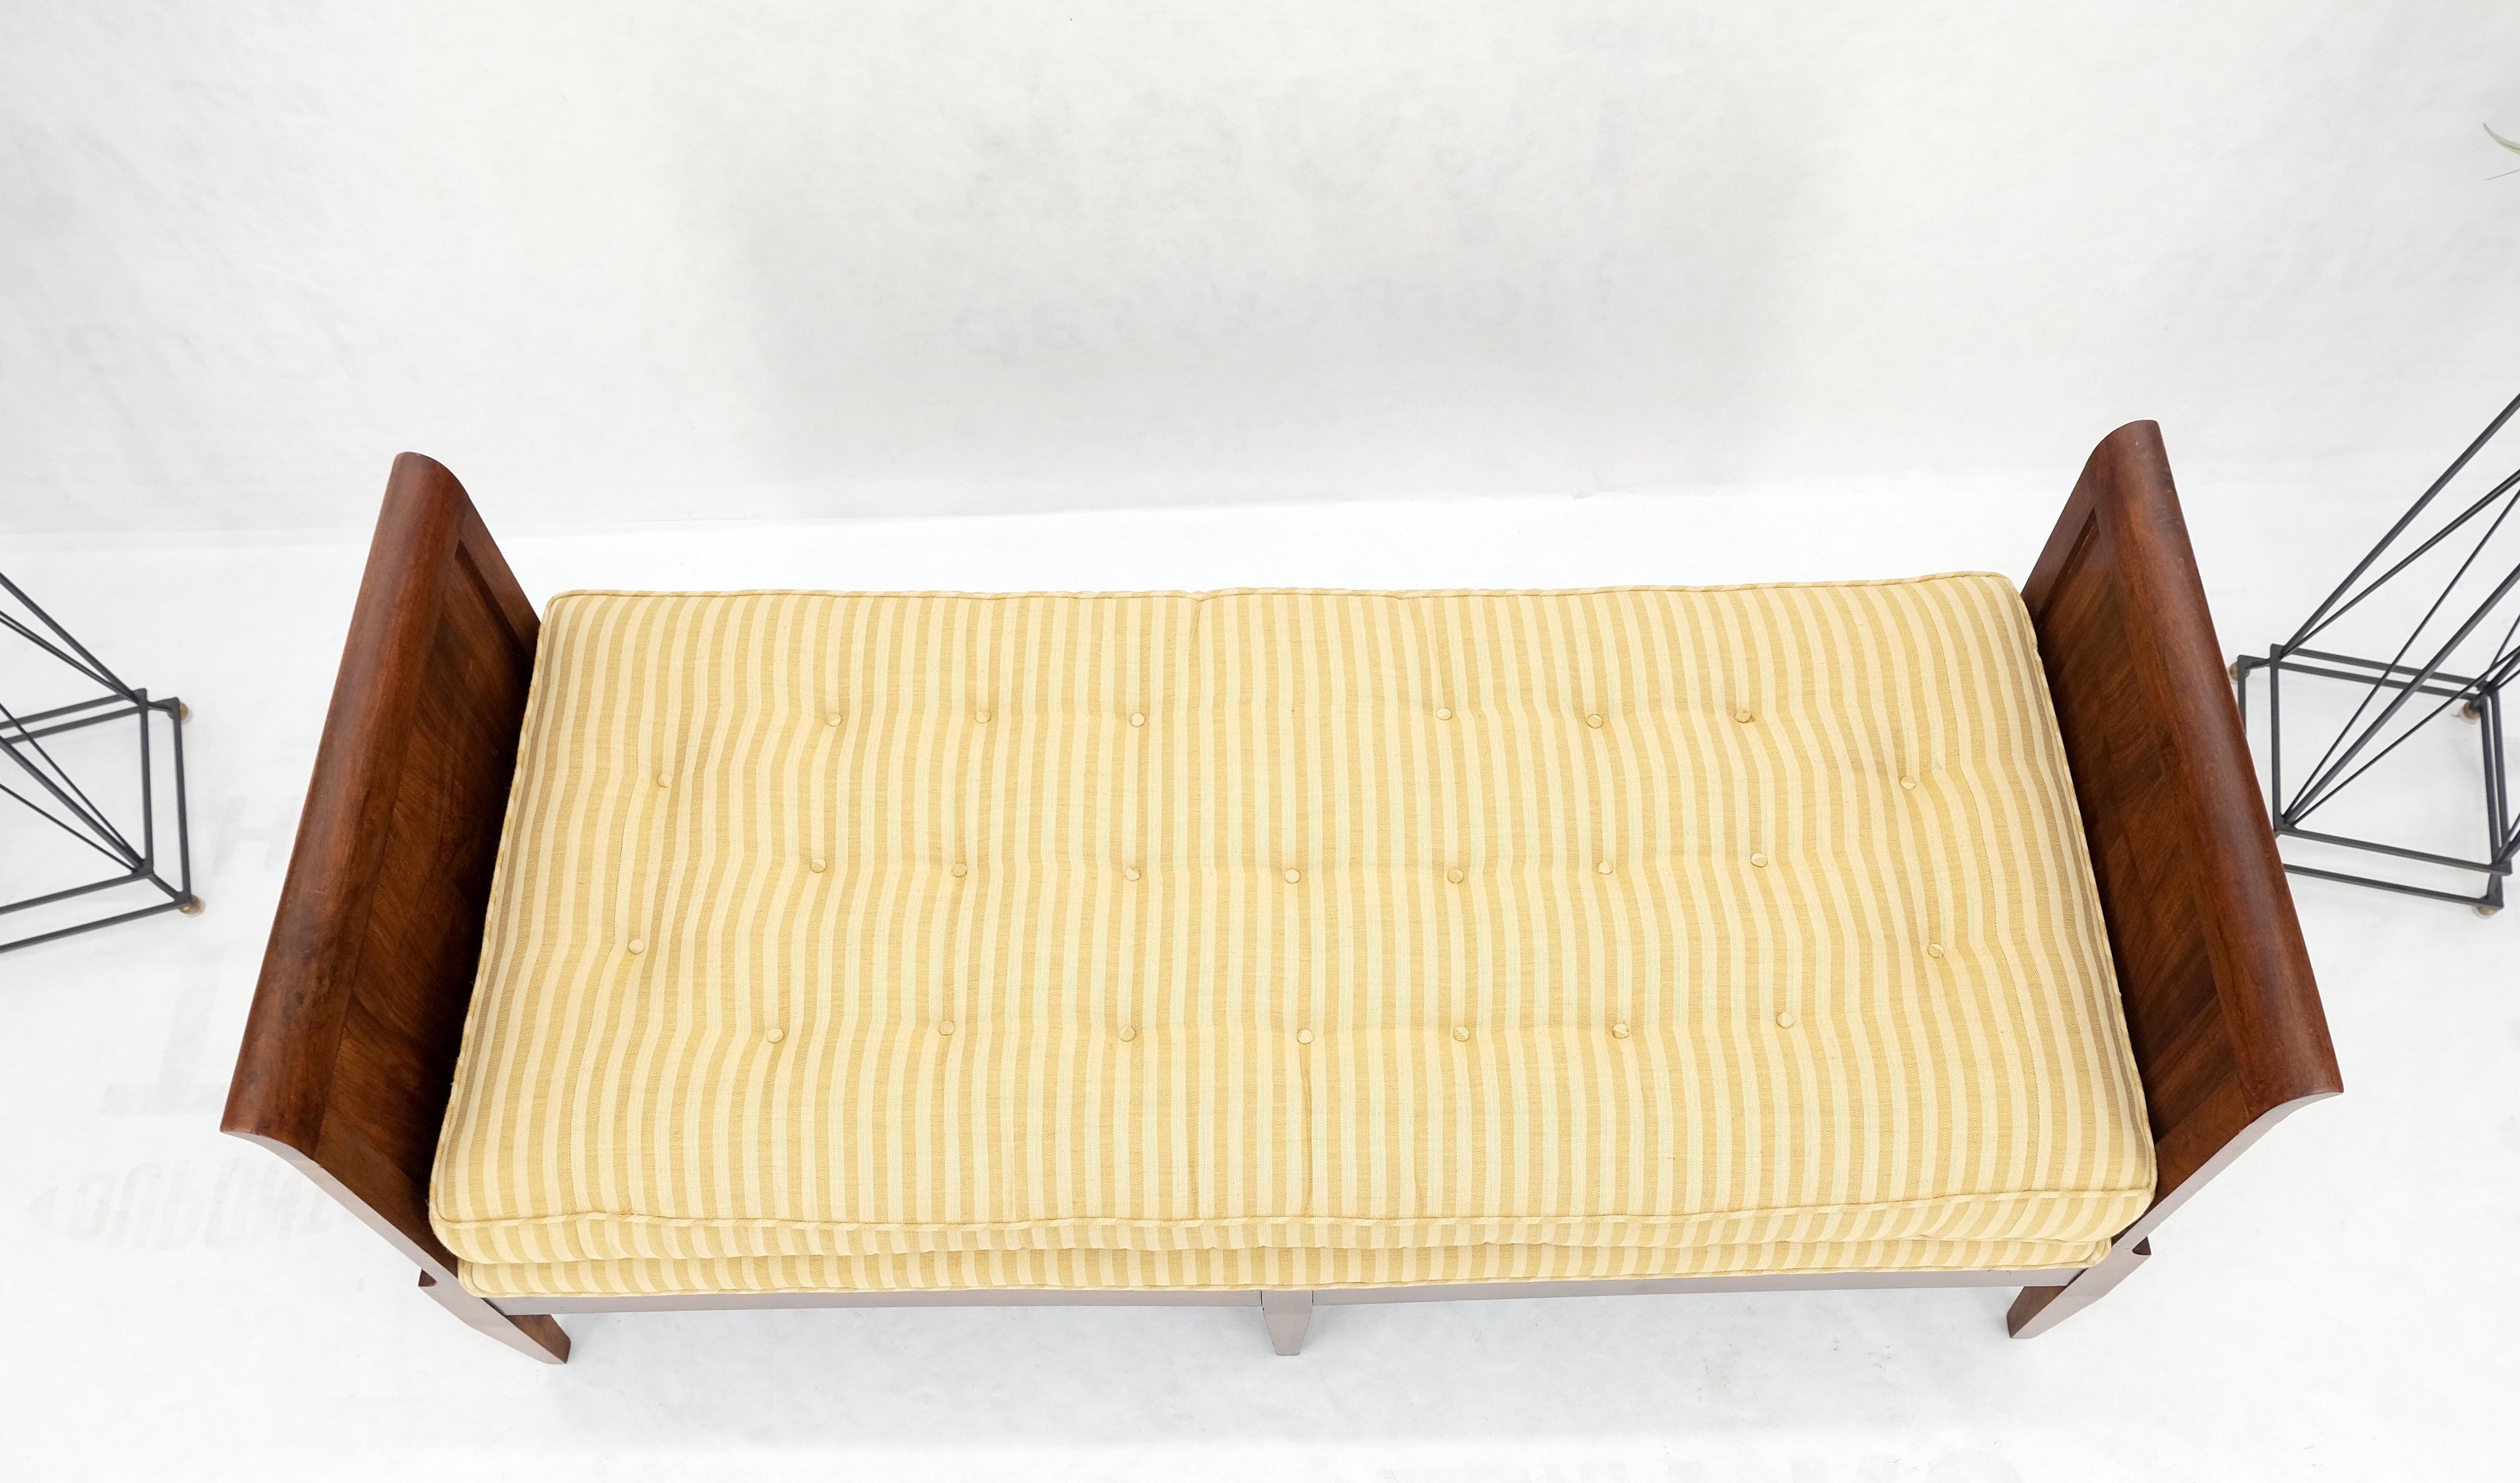 Mahogany Slight Panels Arms Compact Daybed Style Gold Stripe Window Bench MINT! In Good Condition For Sale In Rockaway, NJ